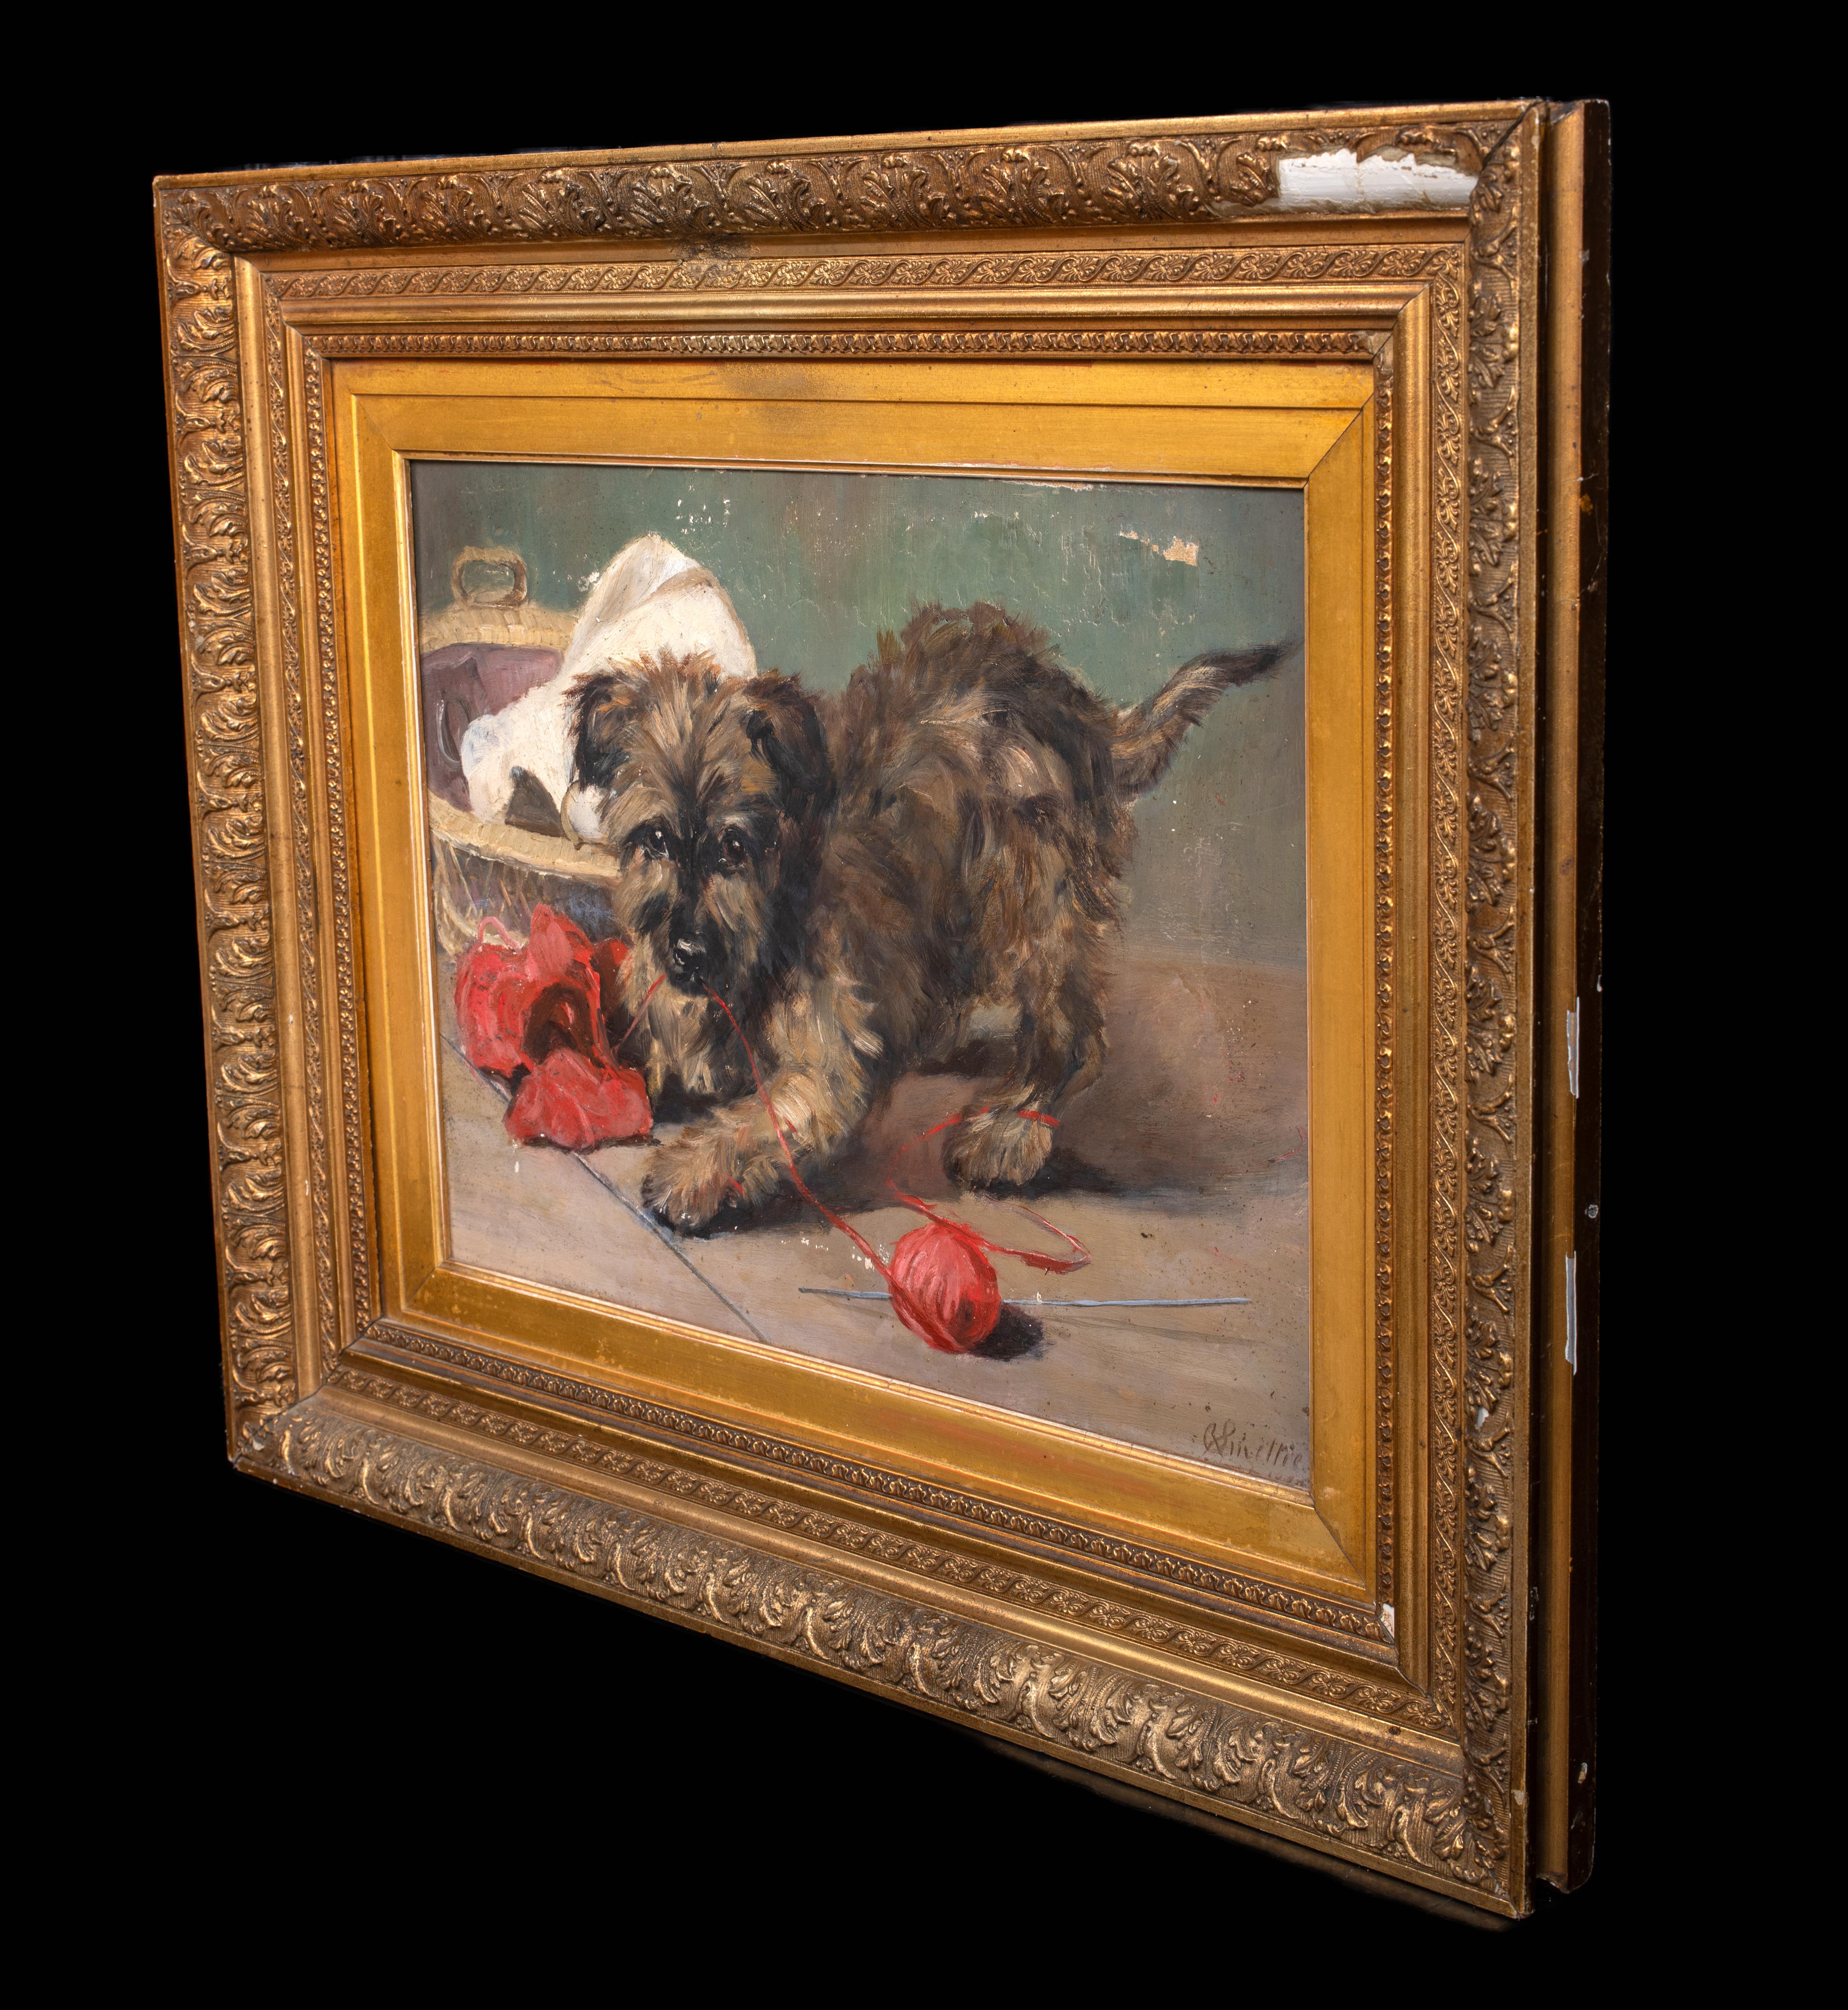 Portrait Of A Carin Terrier Puppy Playing, 19th Century  by Robert Smellie 5